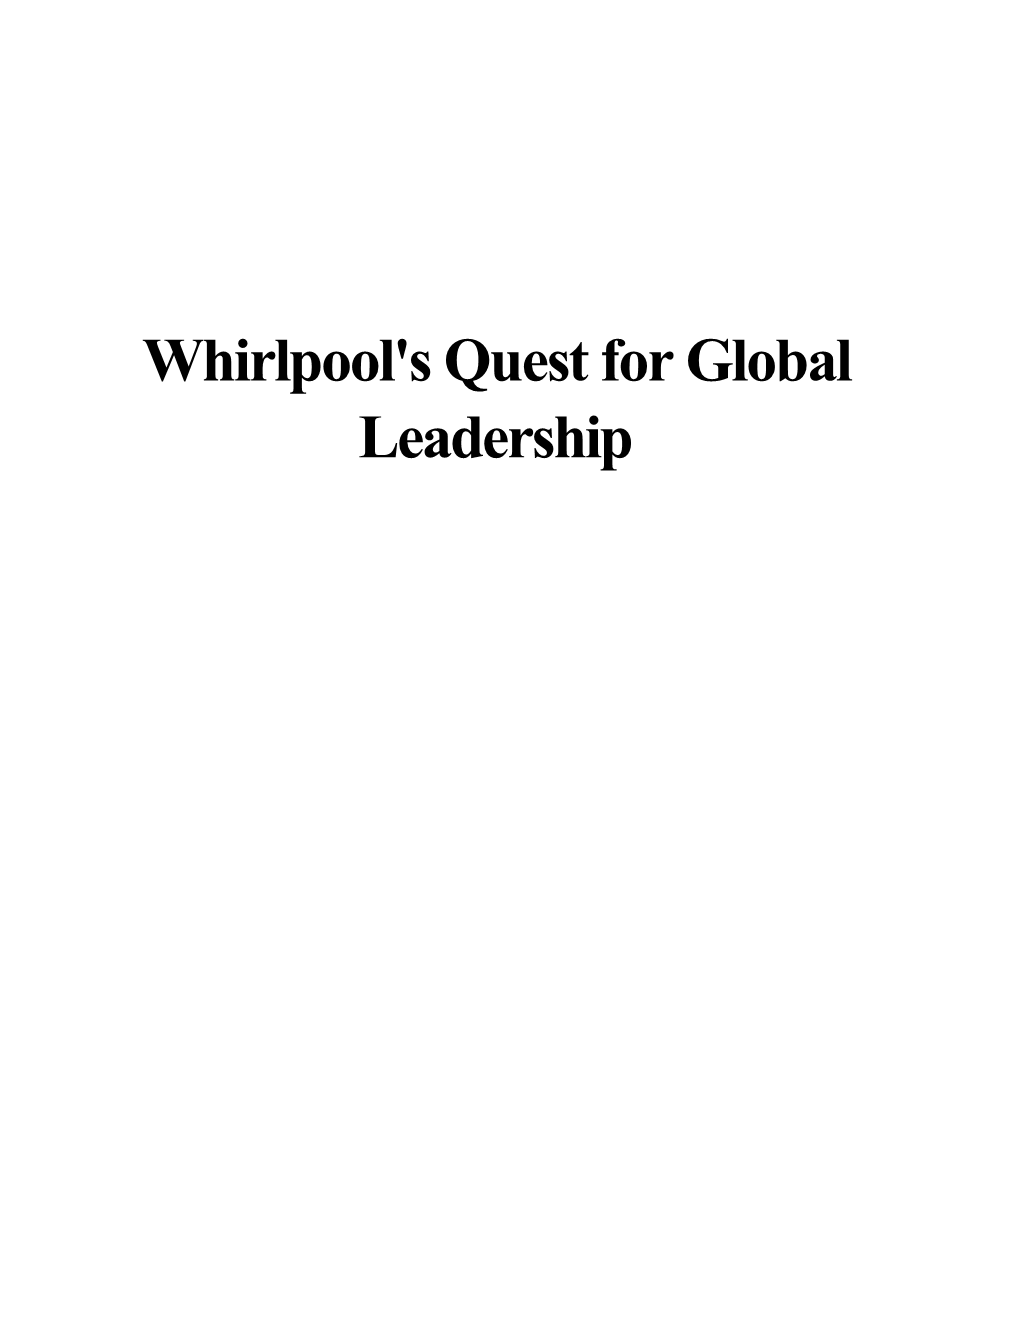 Whirlpool's Quest for Global